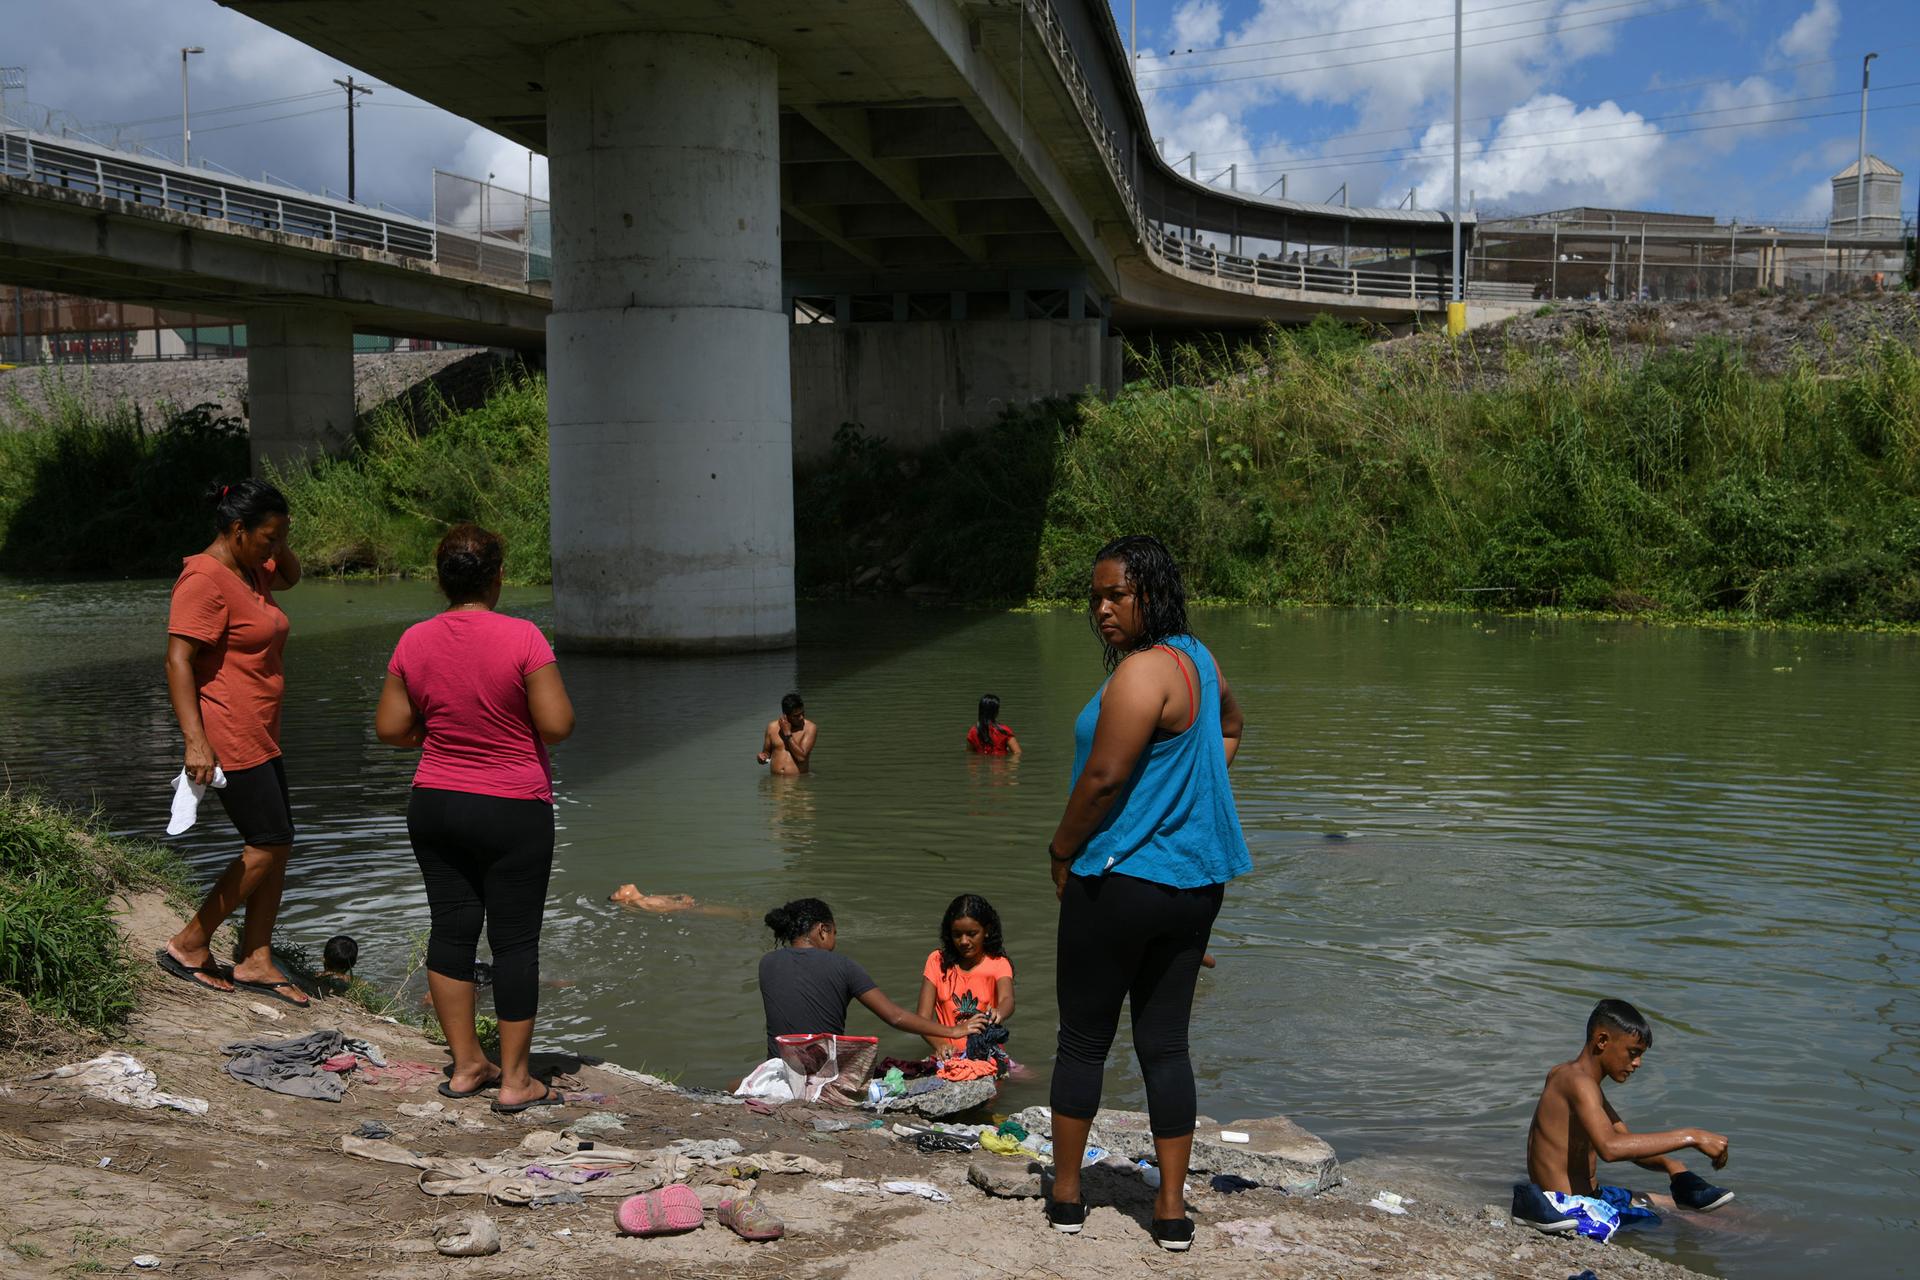 Several people are shown standing on the shore and in the Rio Grande river under a large bridge.